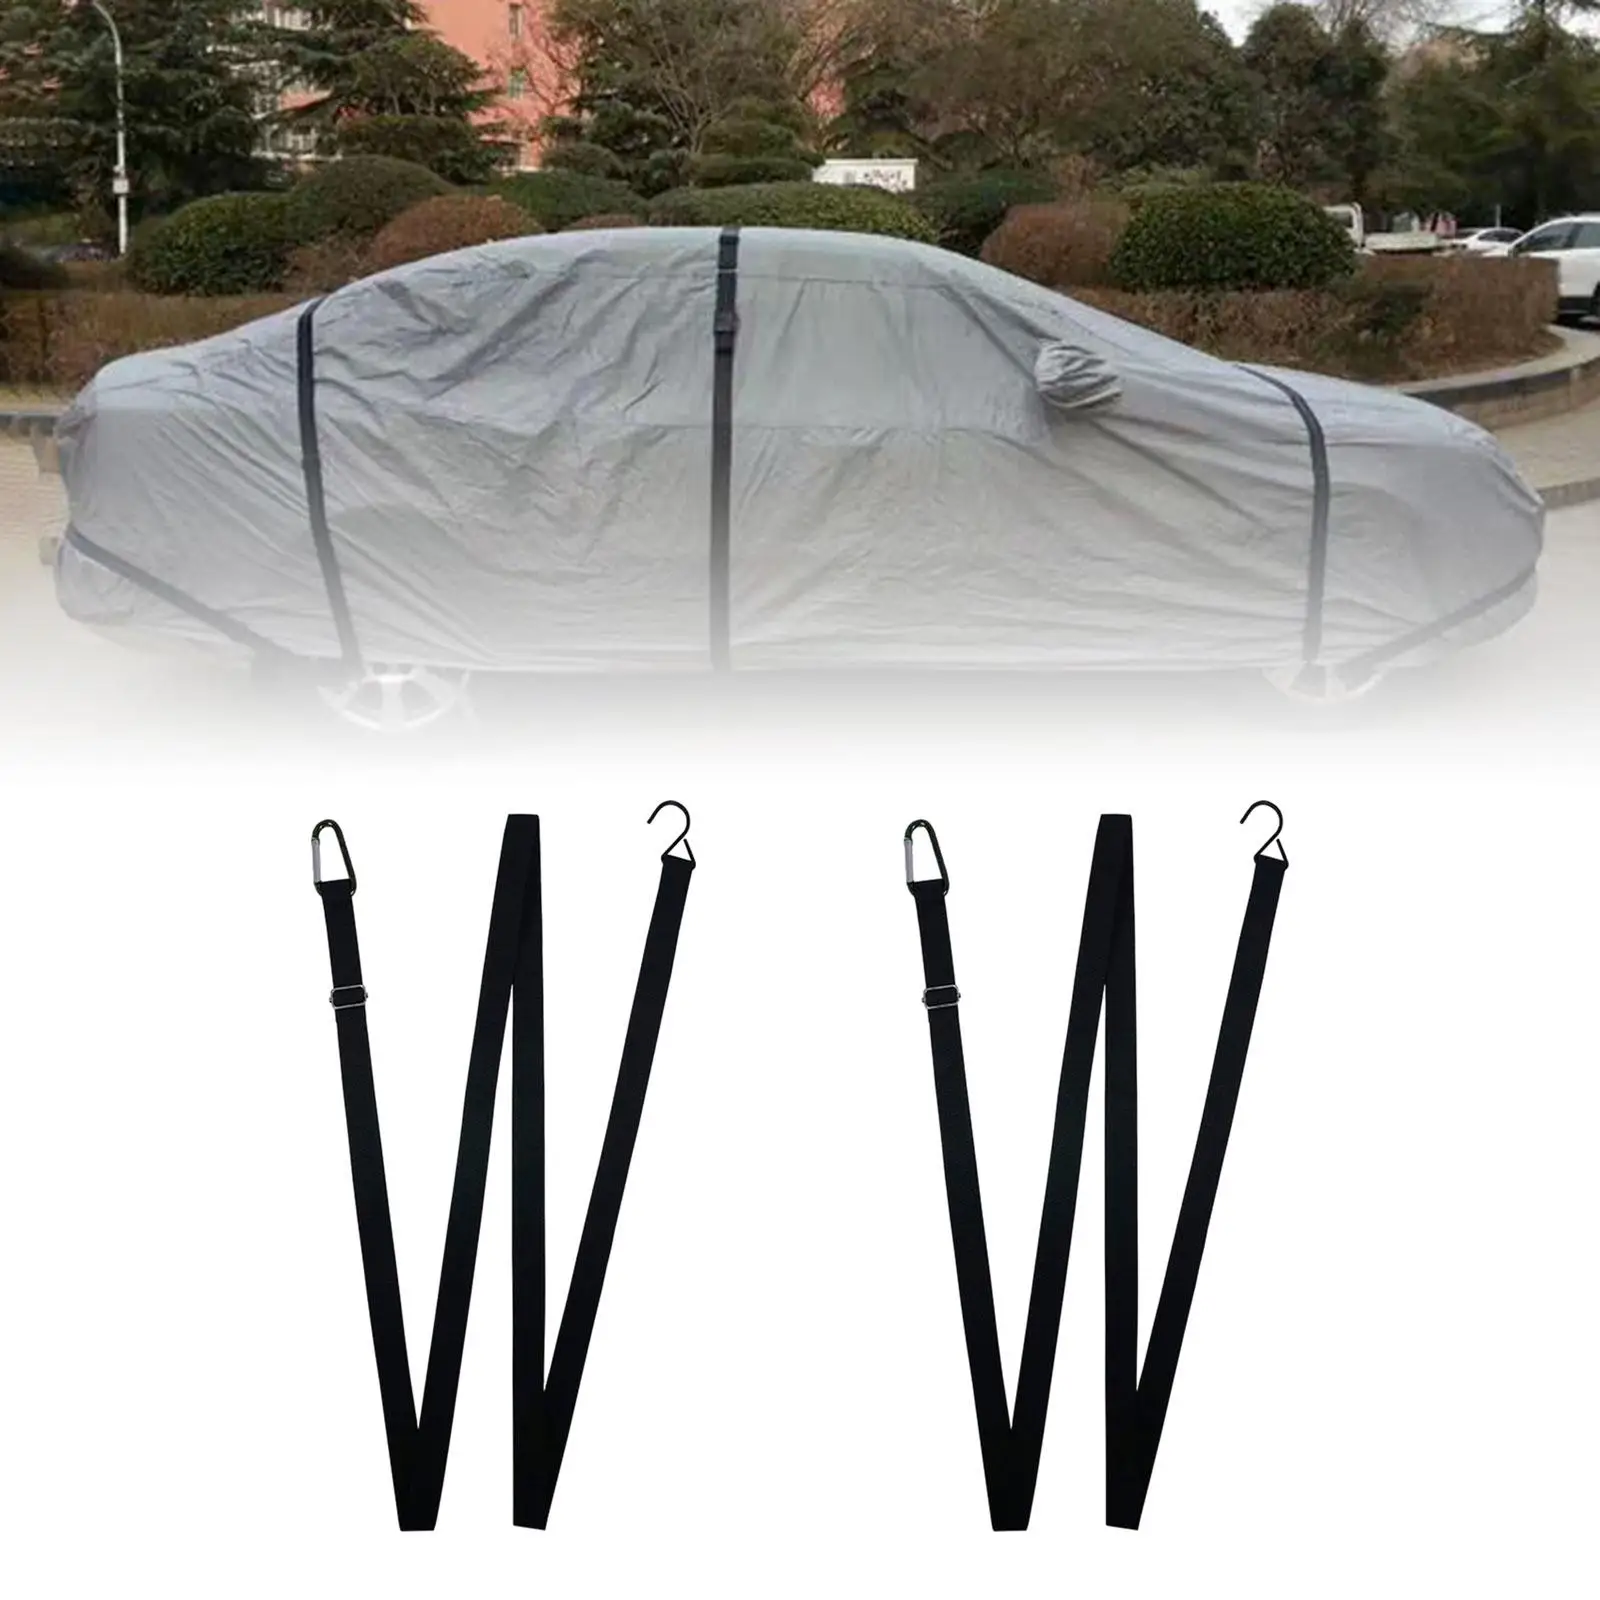 Car Cover Straps Wind Protector Useful Practical Adjustable Car Wind Buckle for Car Covers Automobiles Sedans Trucks